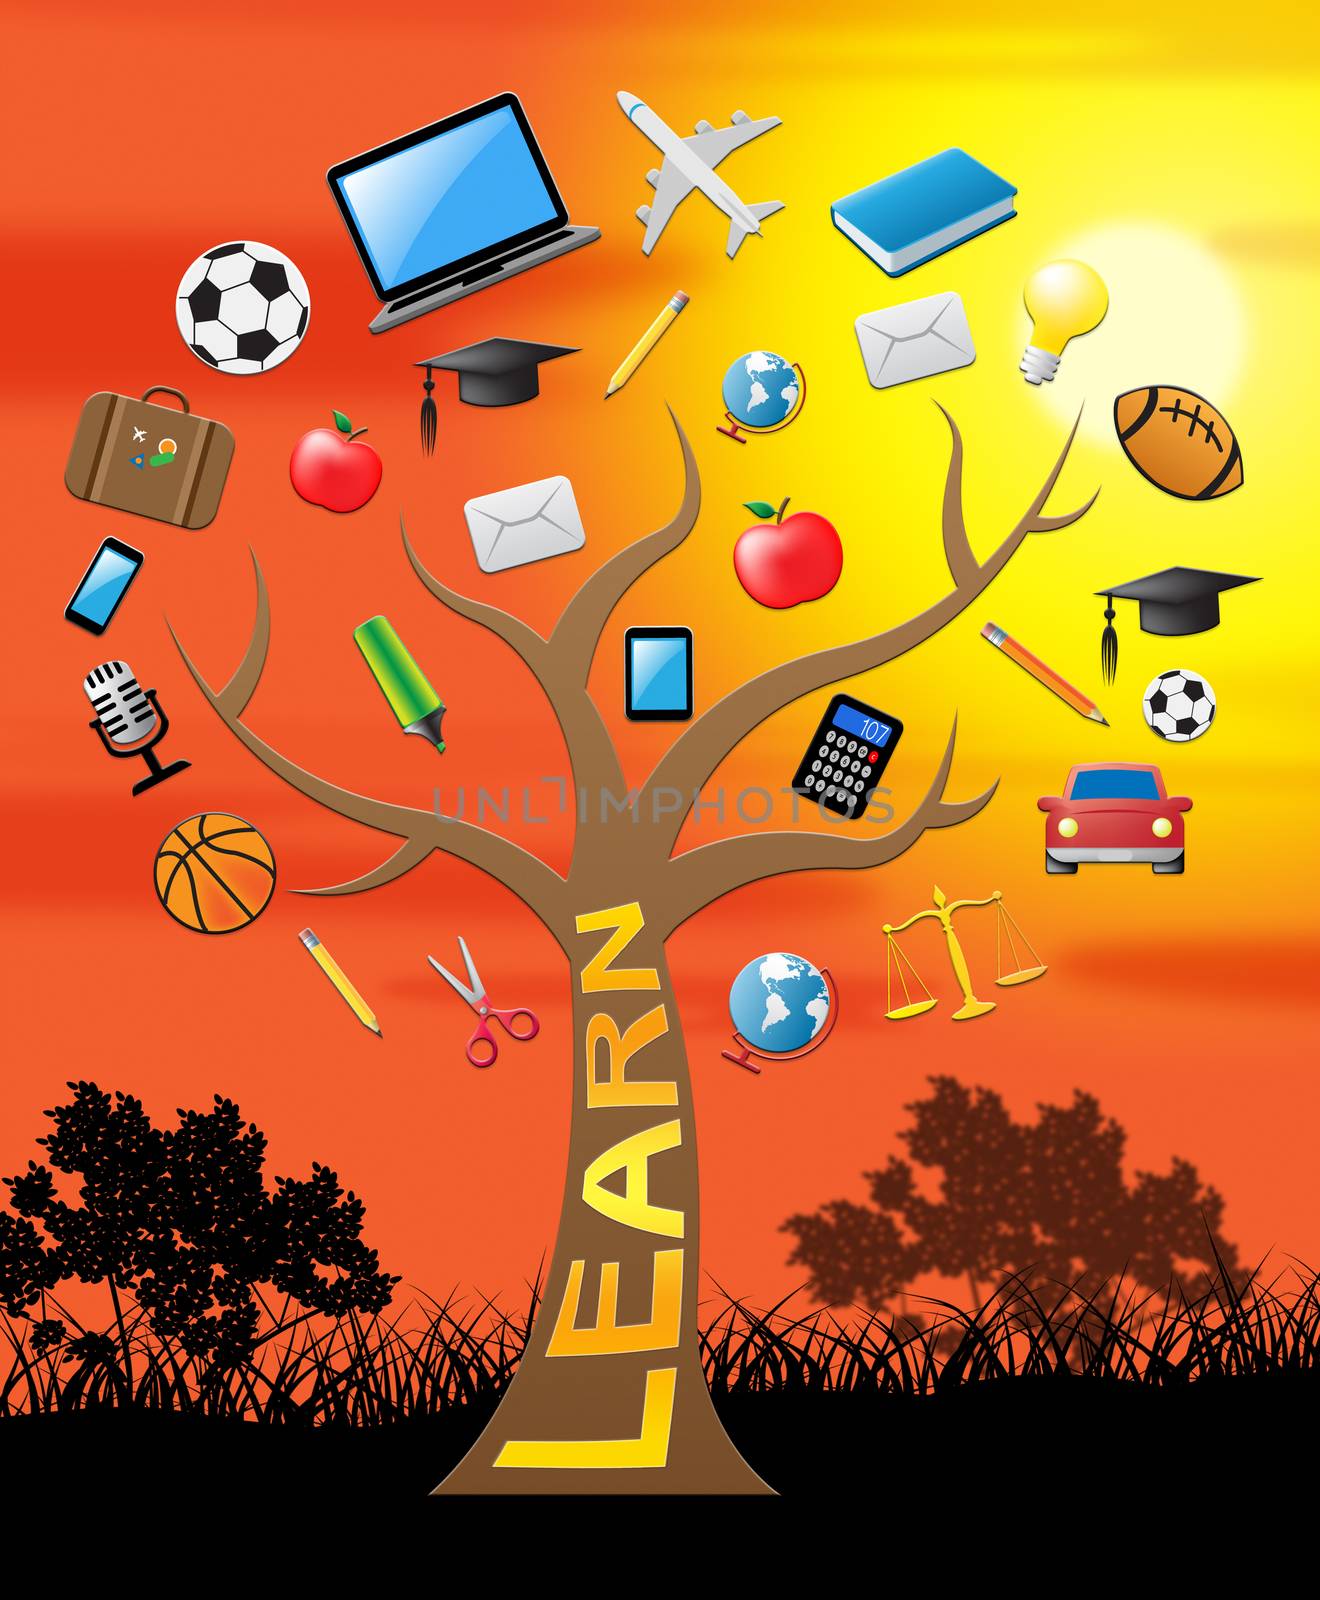 Learn Tree Shows Student Education 3d Illustration by stuartmiles